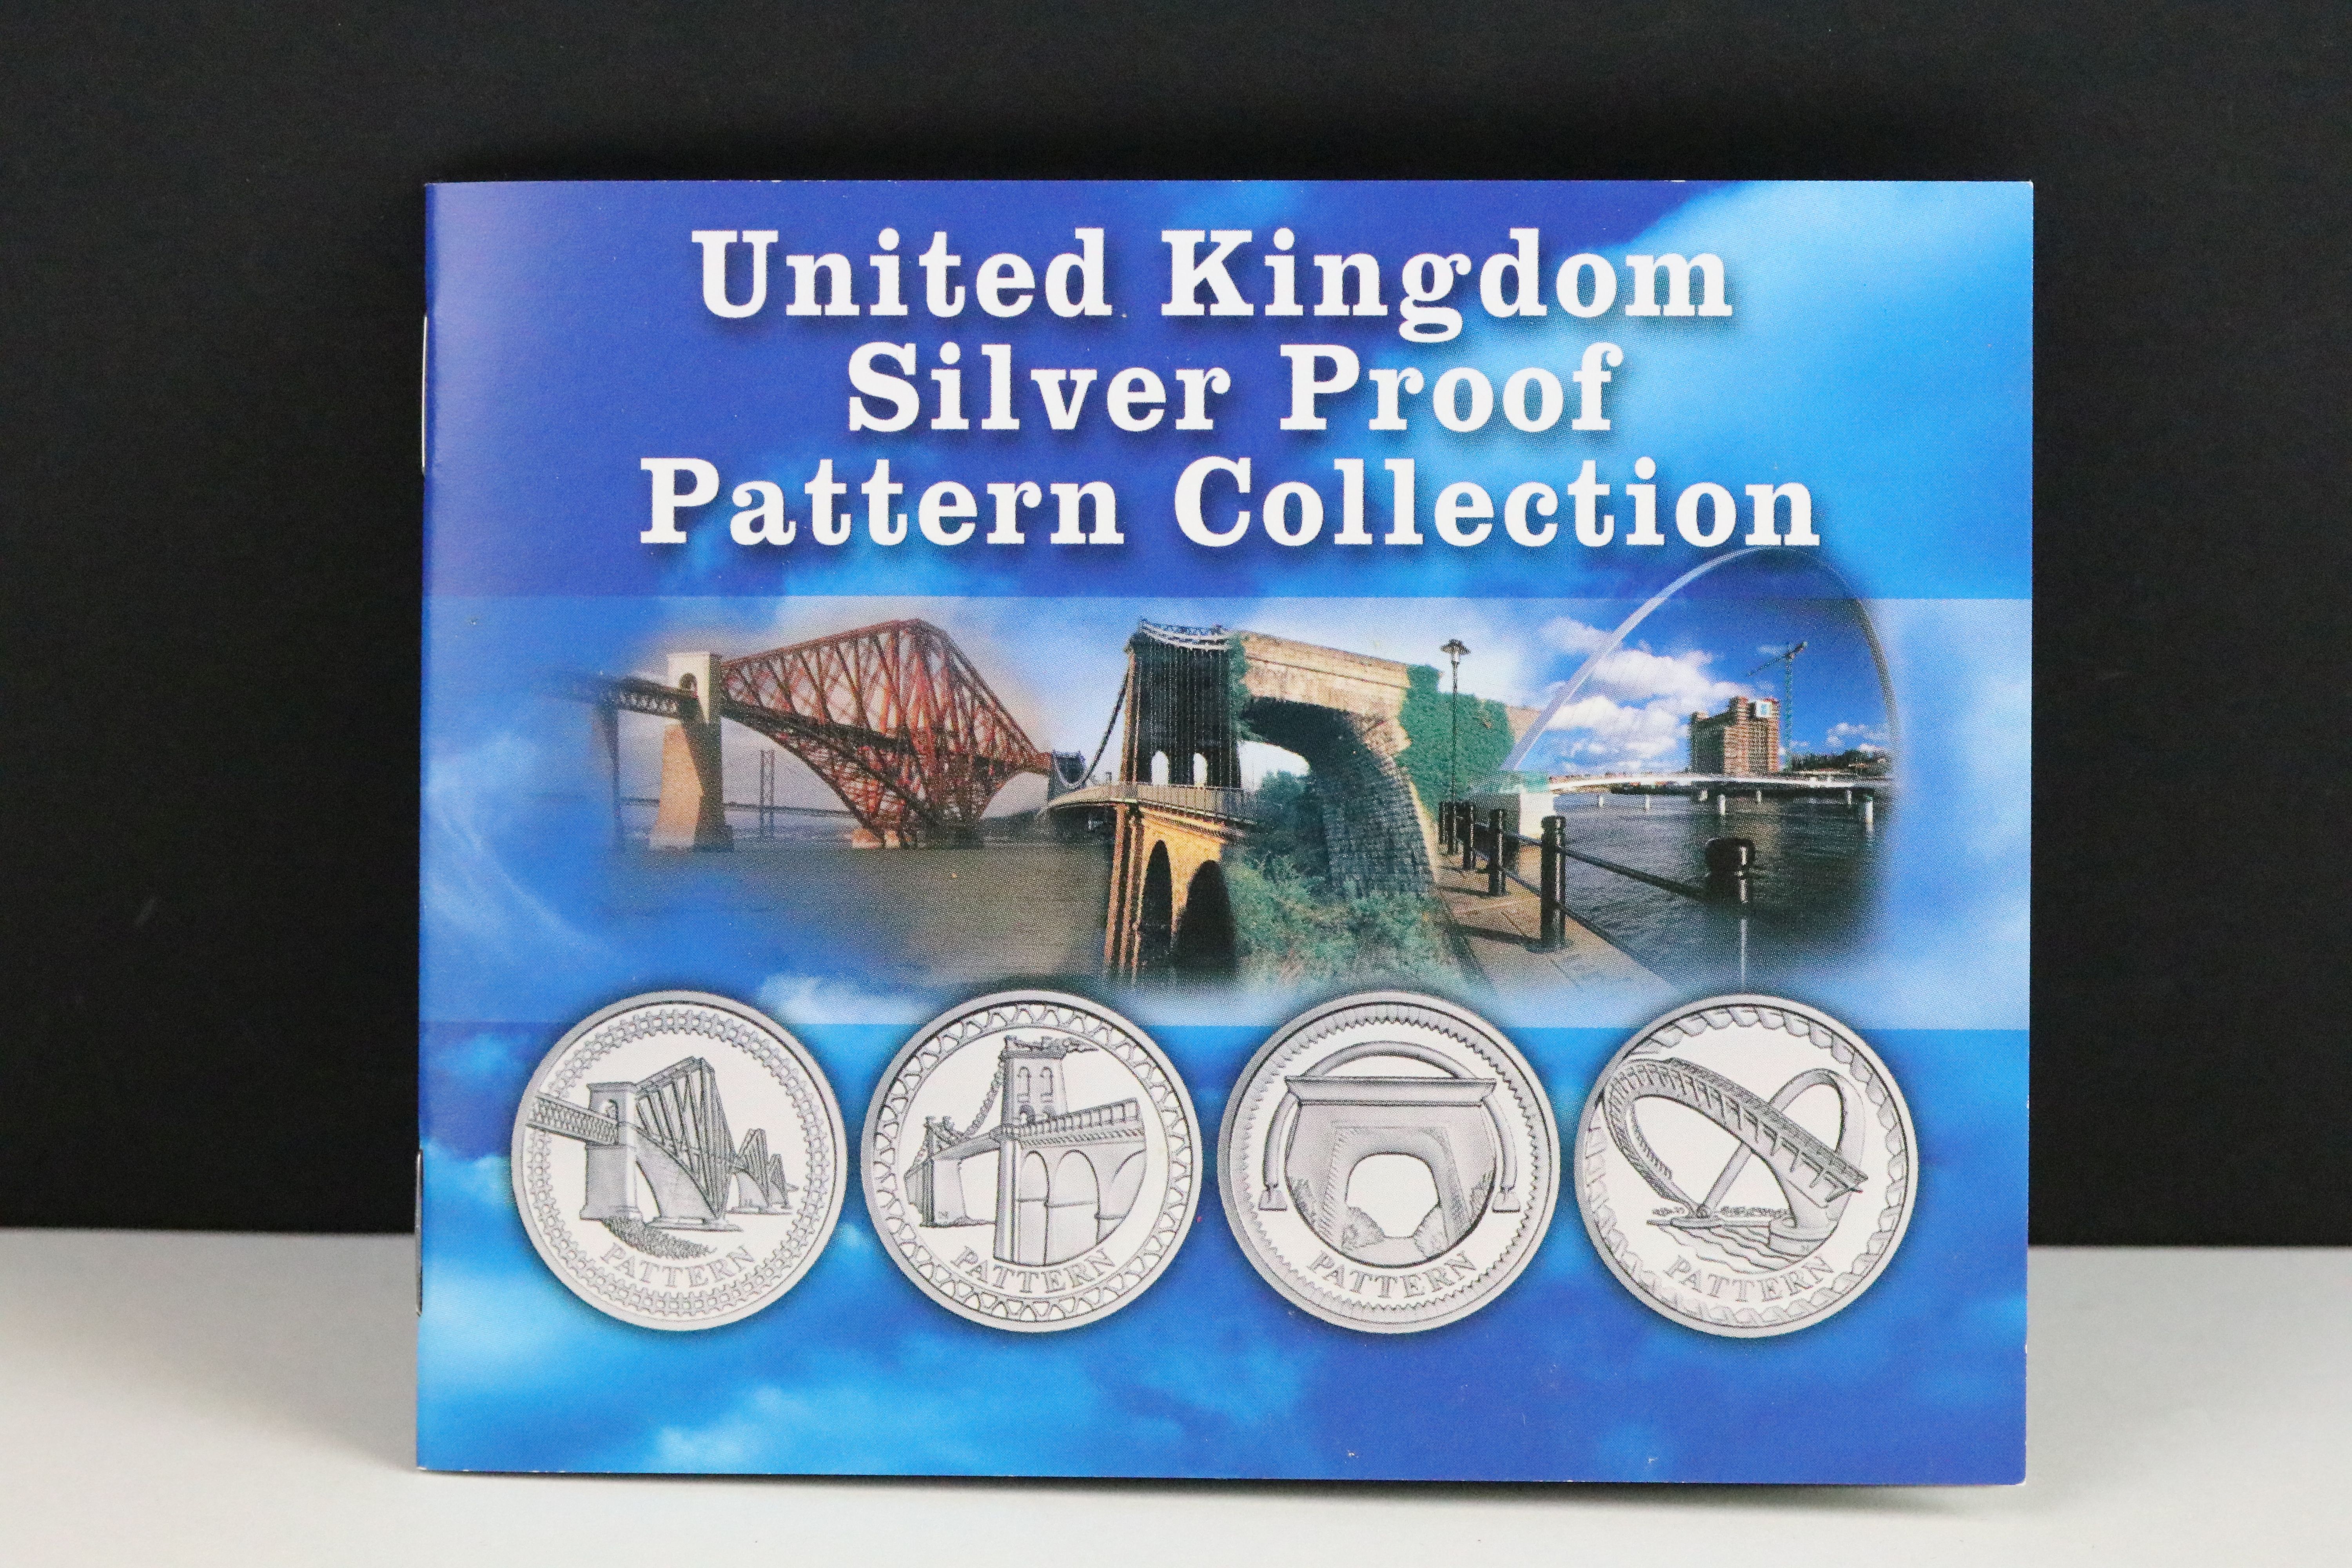 A Royal Mint United Kingdom silver proof £1 four coin pattern collection encapsulted within fitted - Image 6 of 6